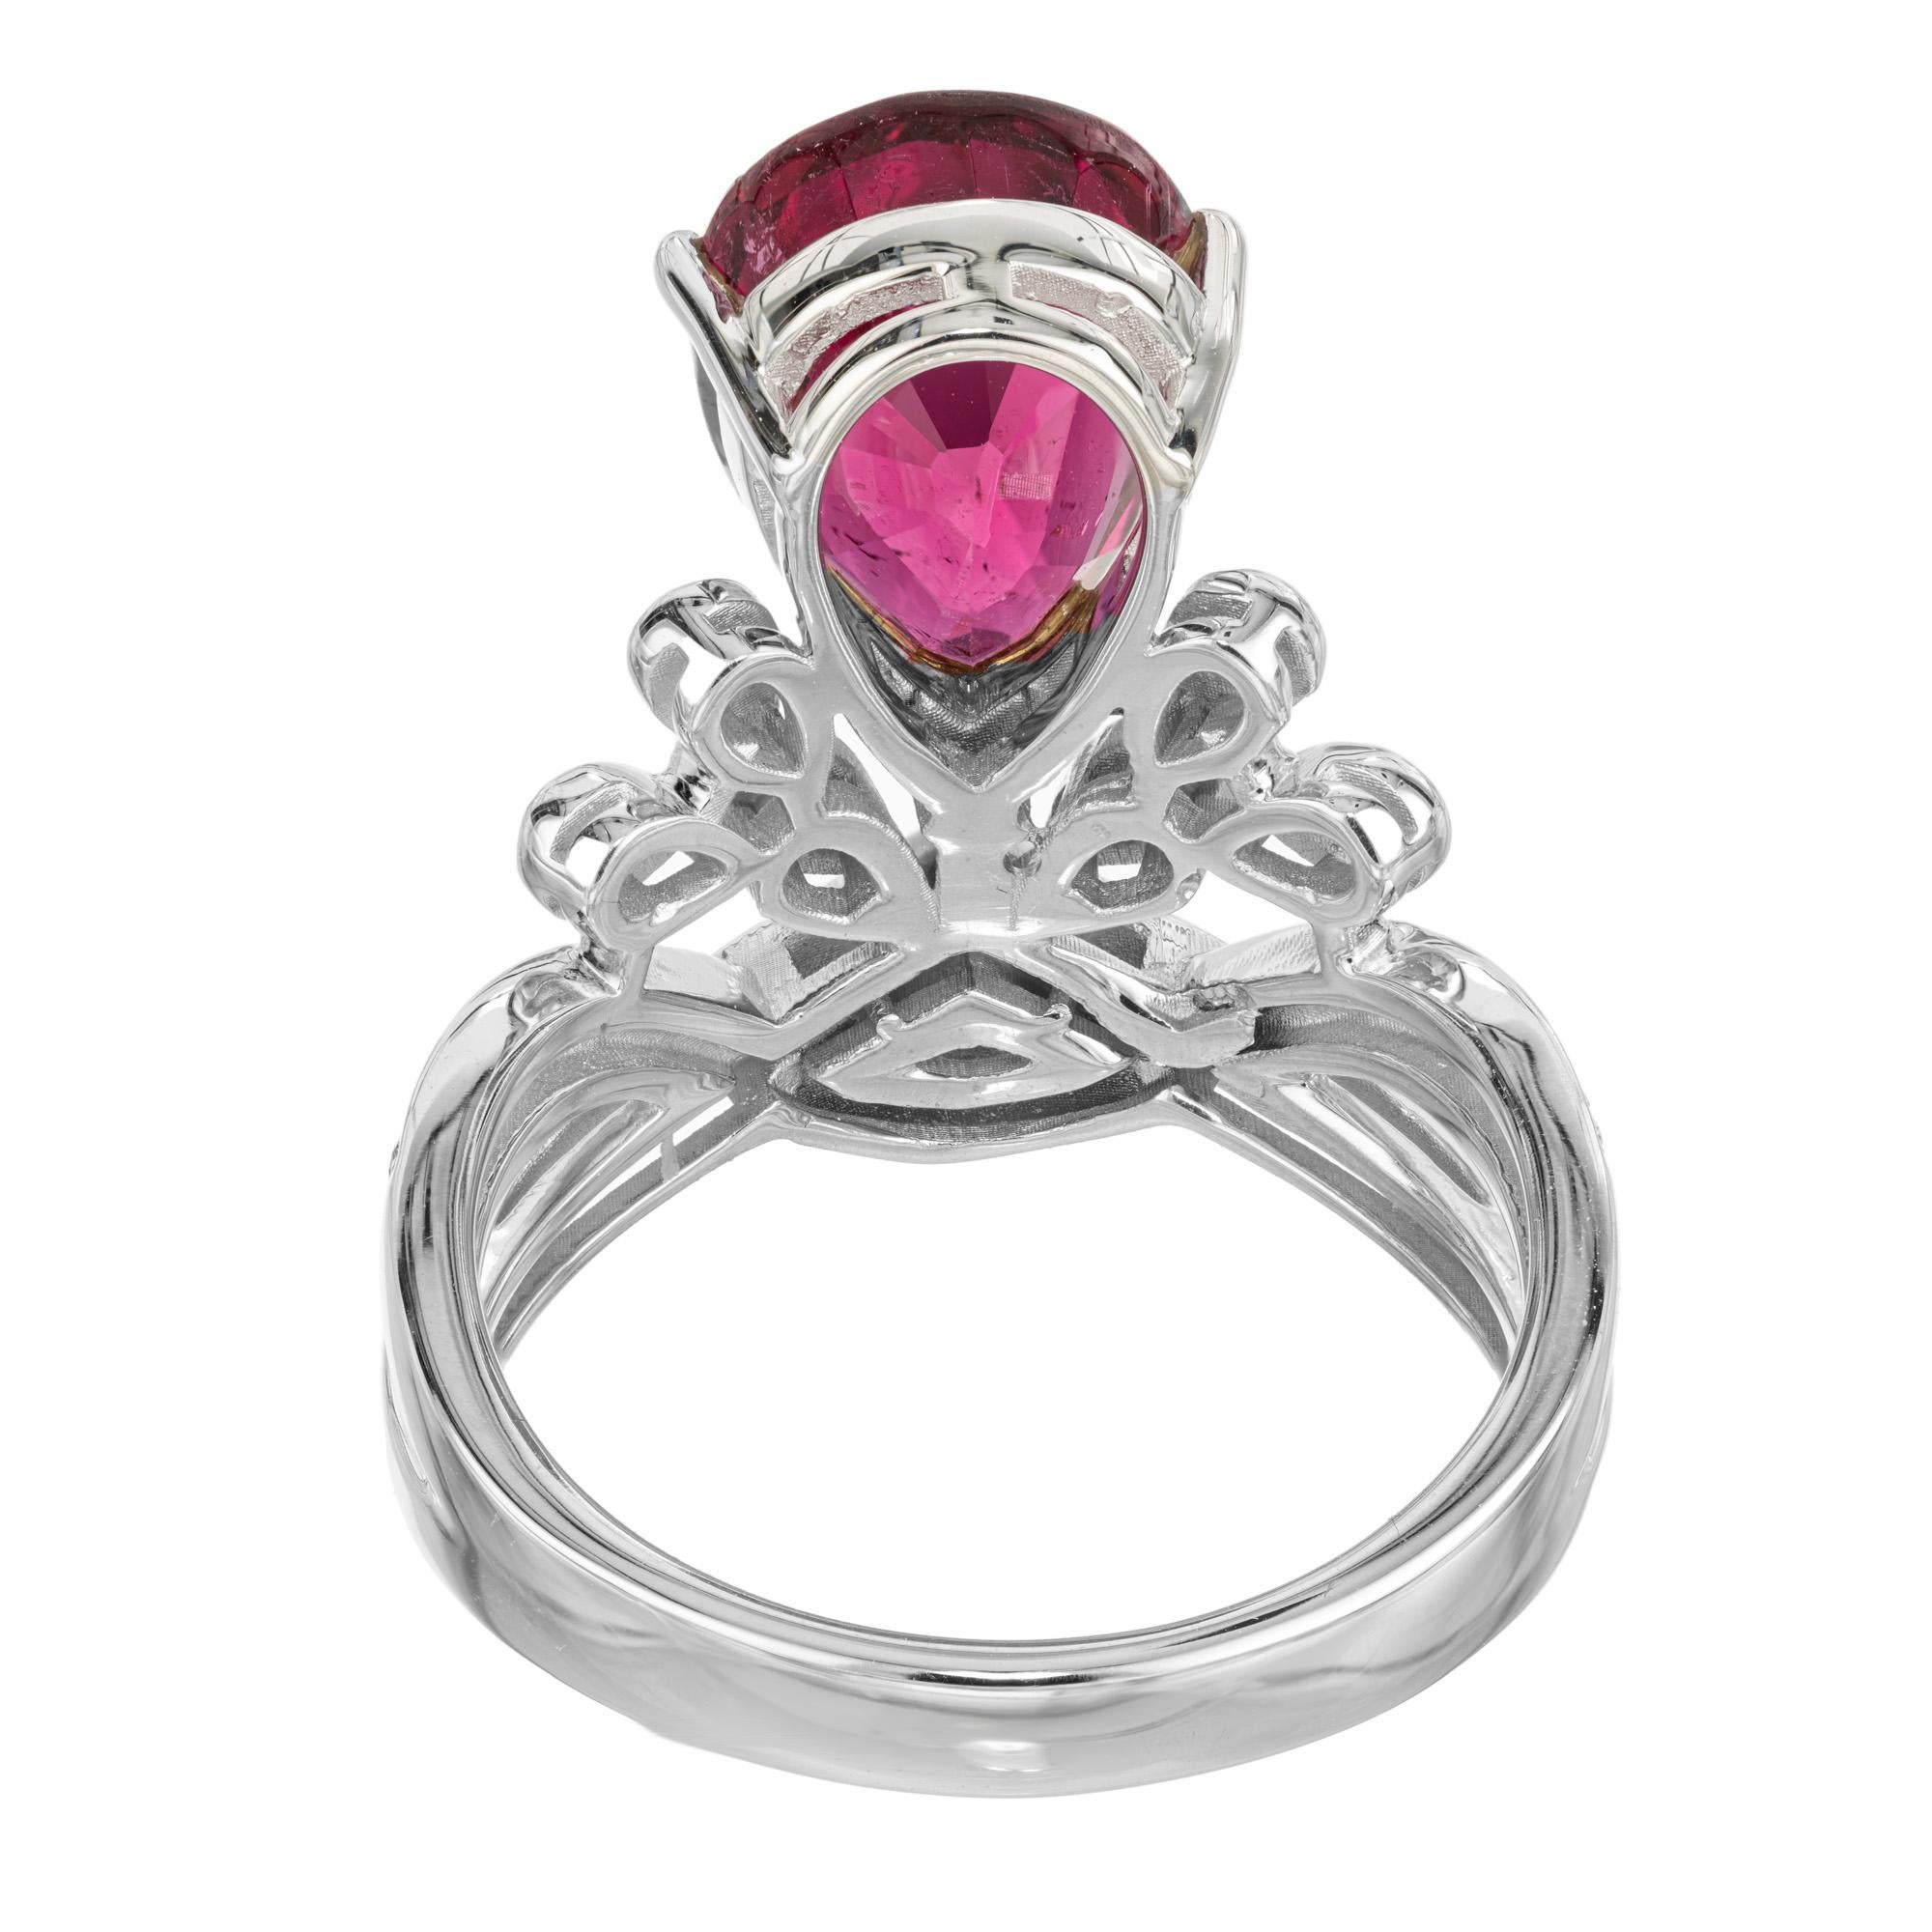 3.15 Carat Pear Tourmaline Diamond White Gold Cocktail Ring  In Good Condition For Sale In Stamford, CT